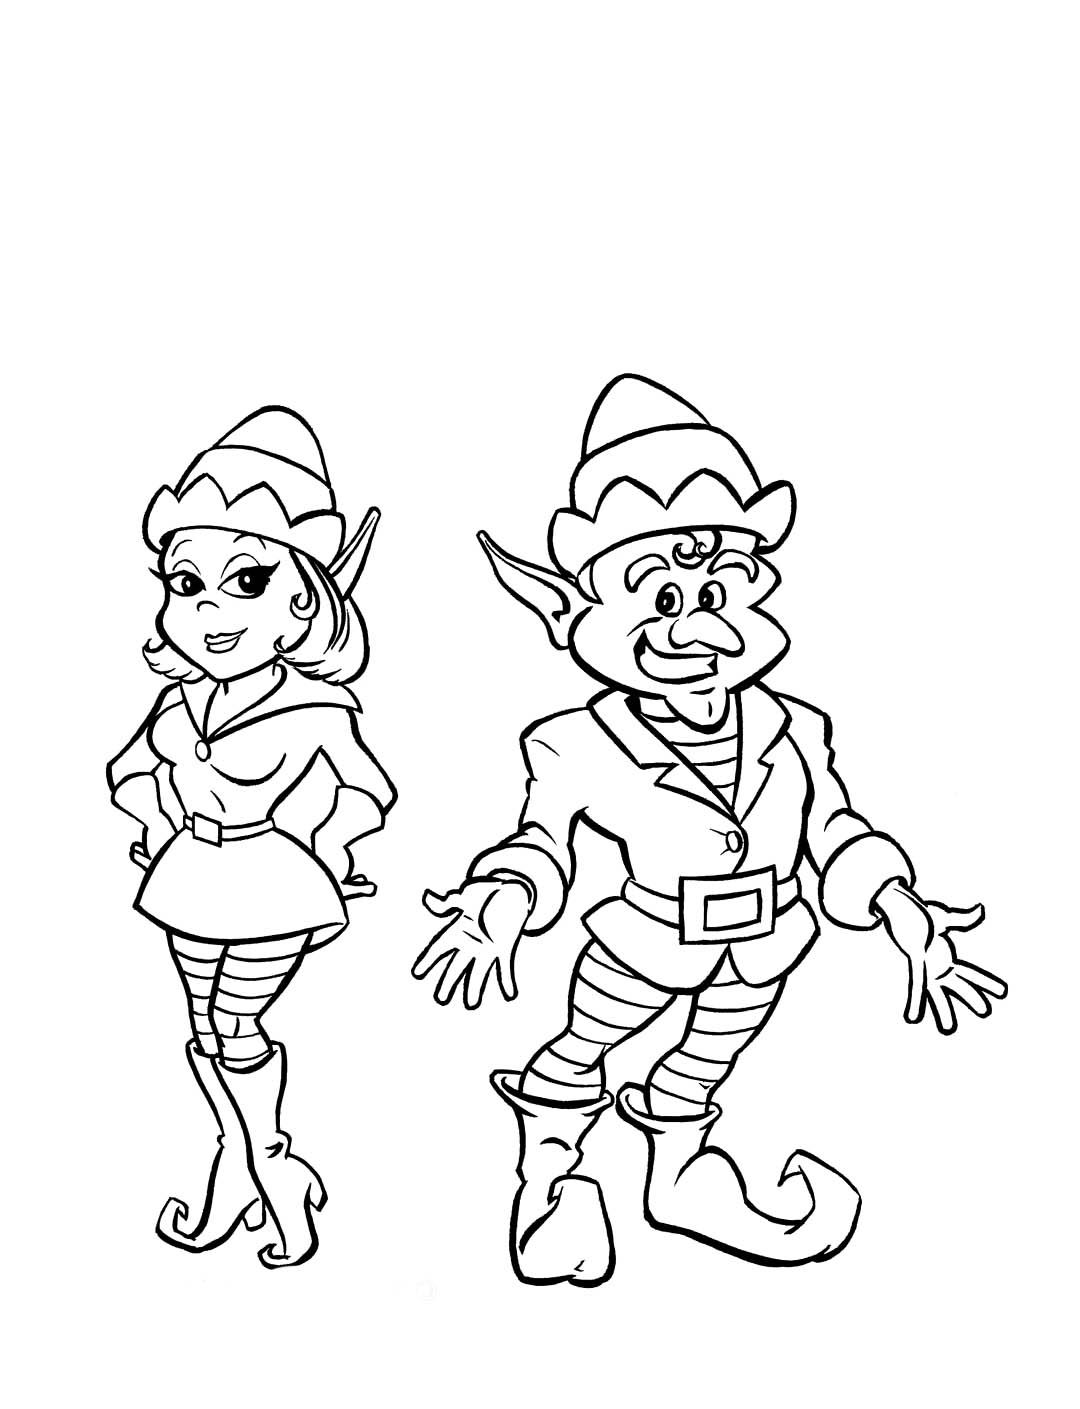 Download Printable Girl Elf On The Shelf Coloring Pages - Coloring Home